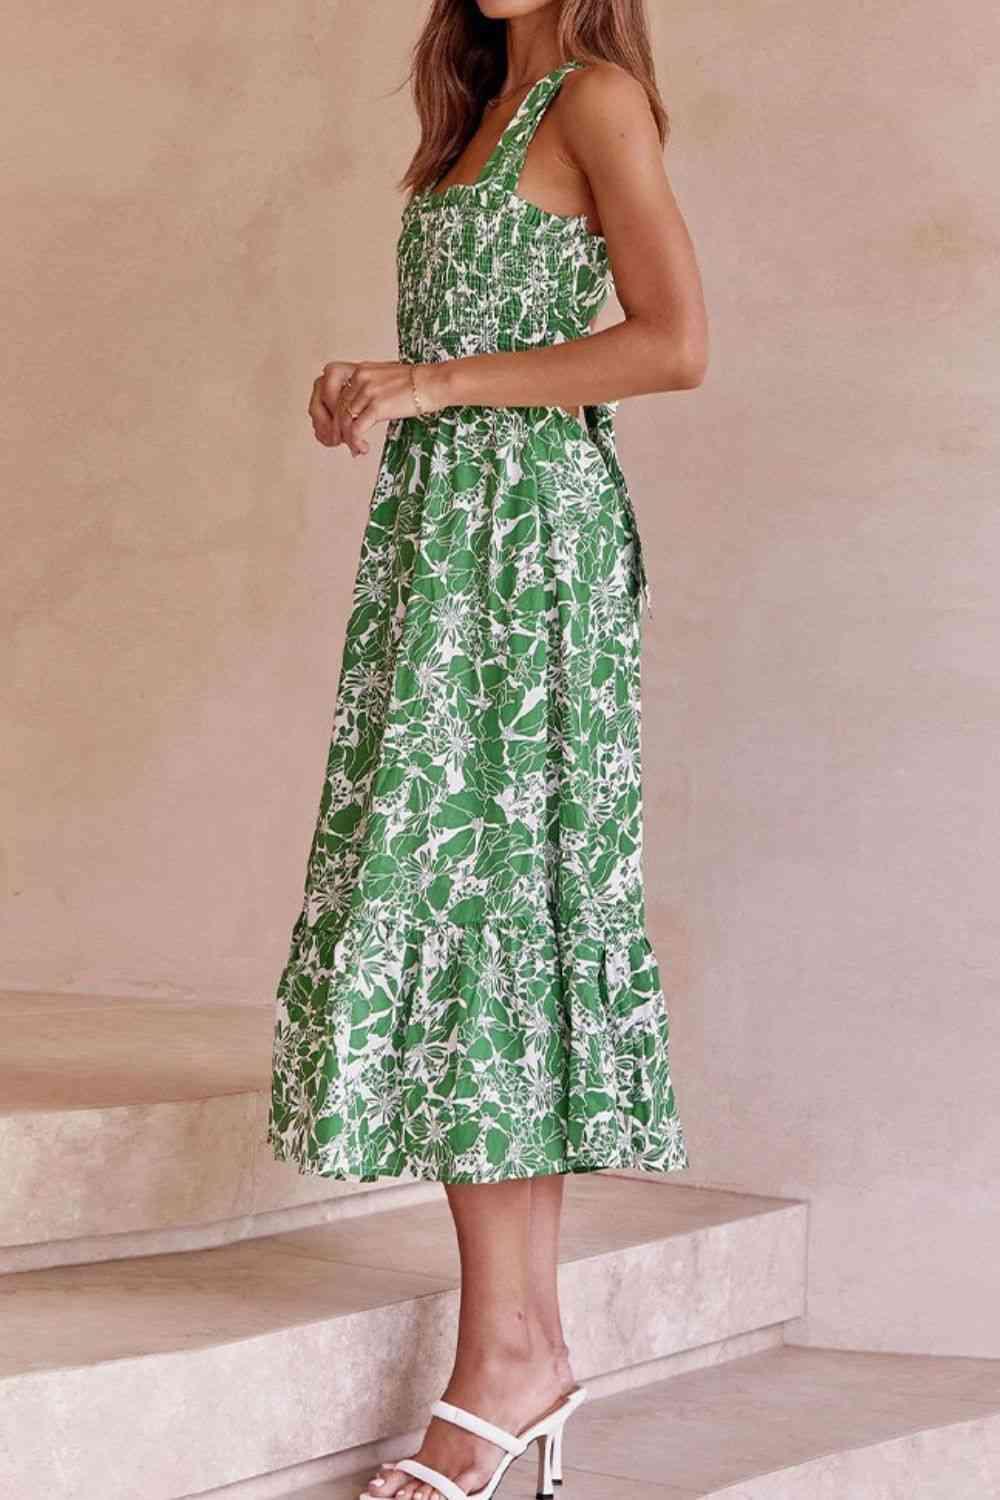 a woman in a green dress standing on steps